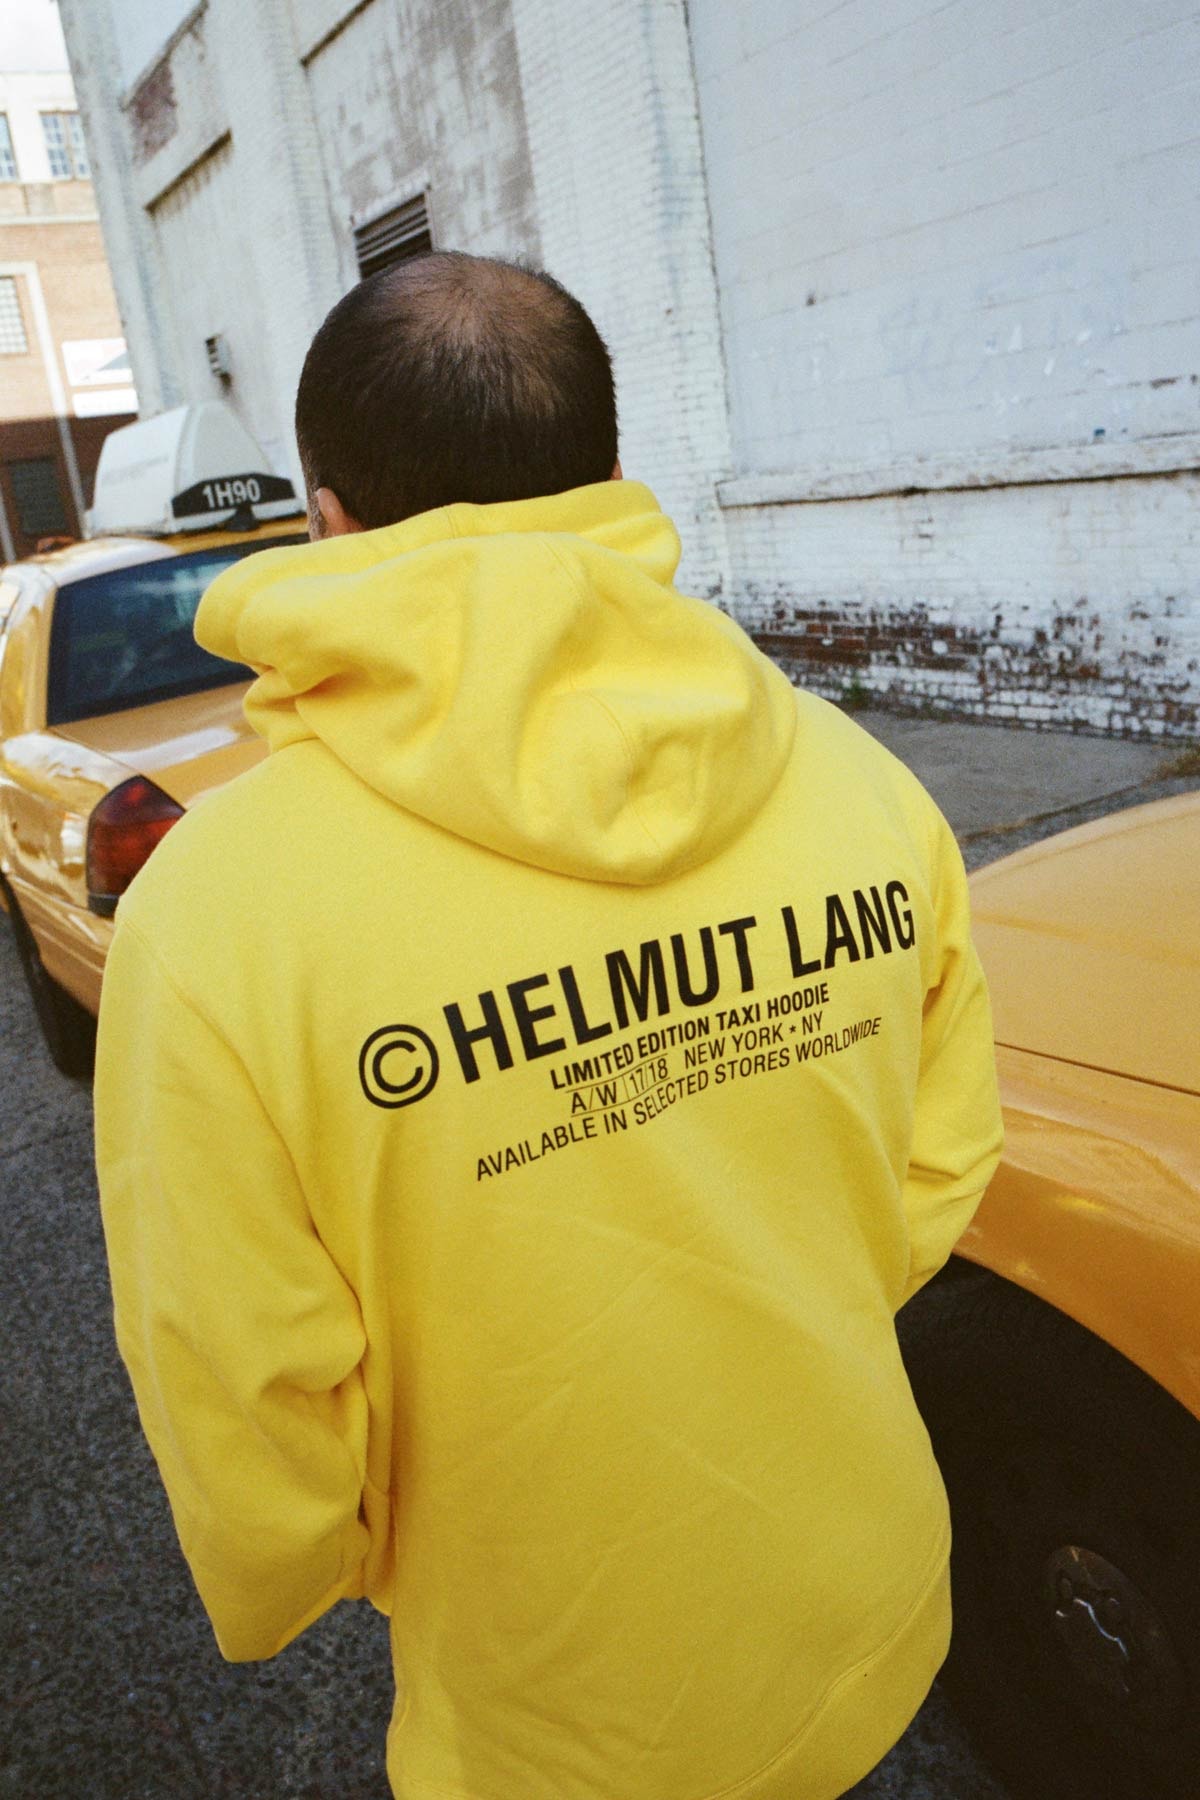 Helmut Lang Global Taxi Initiative New York Hoodie Yellow